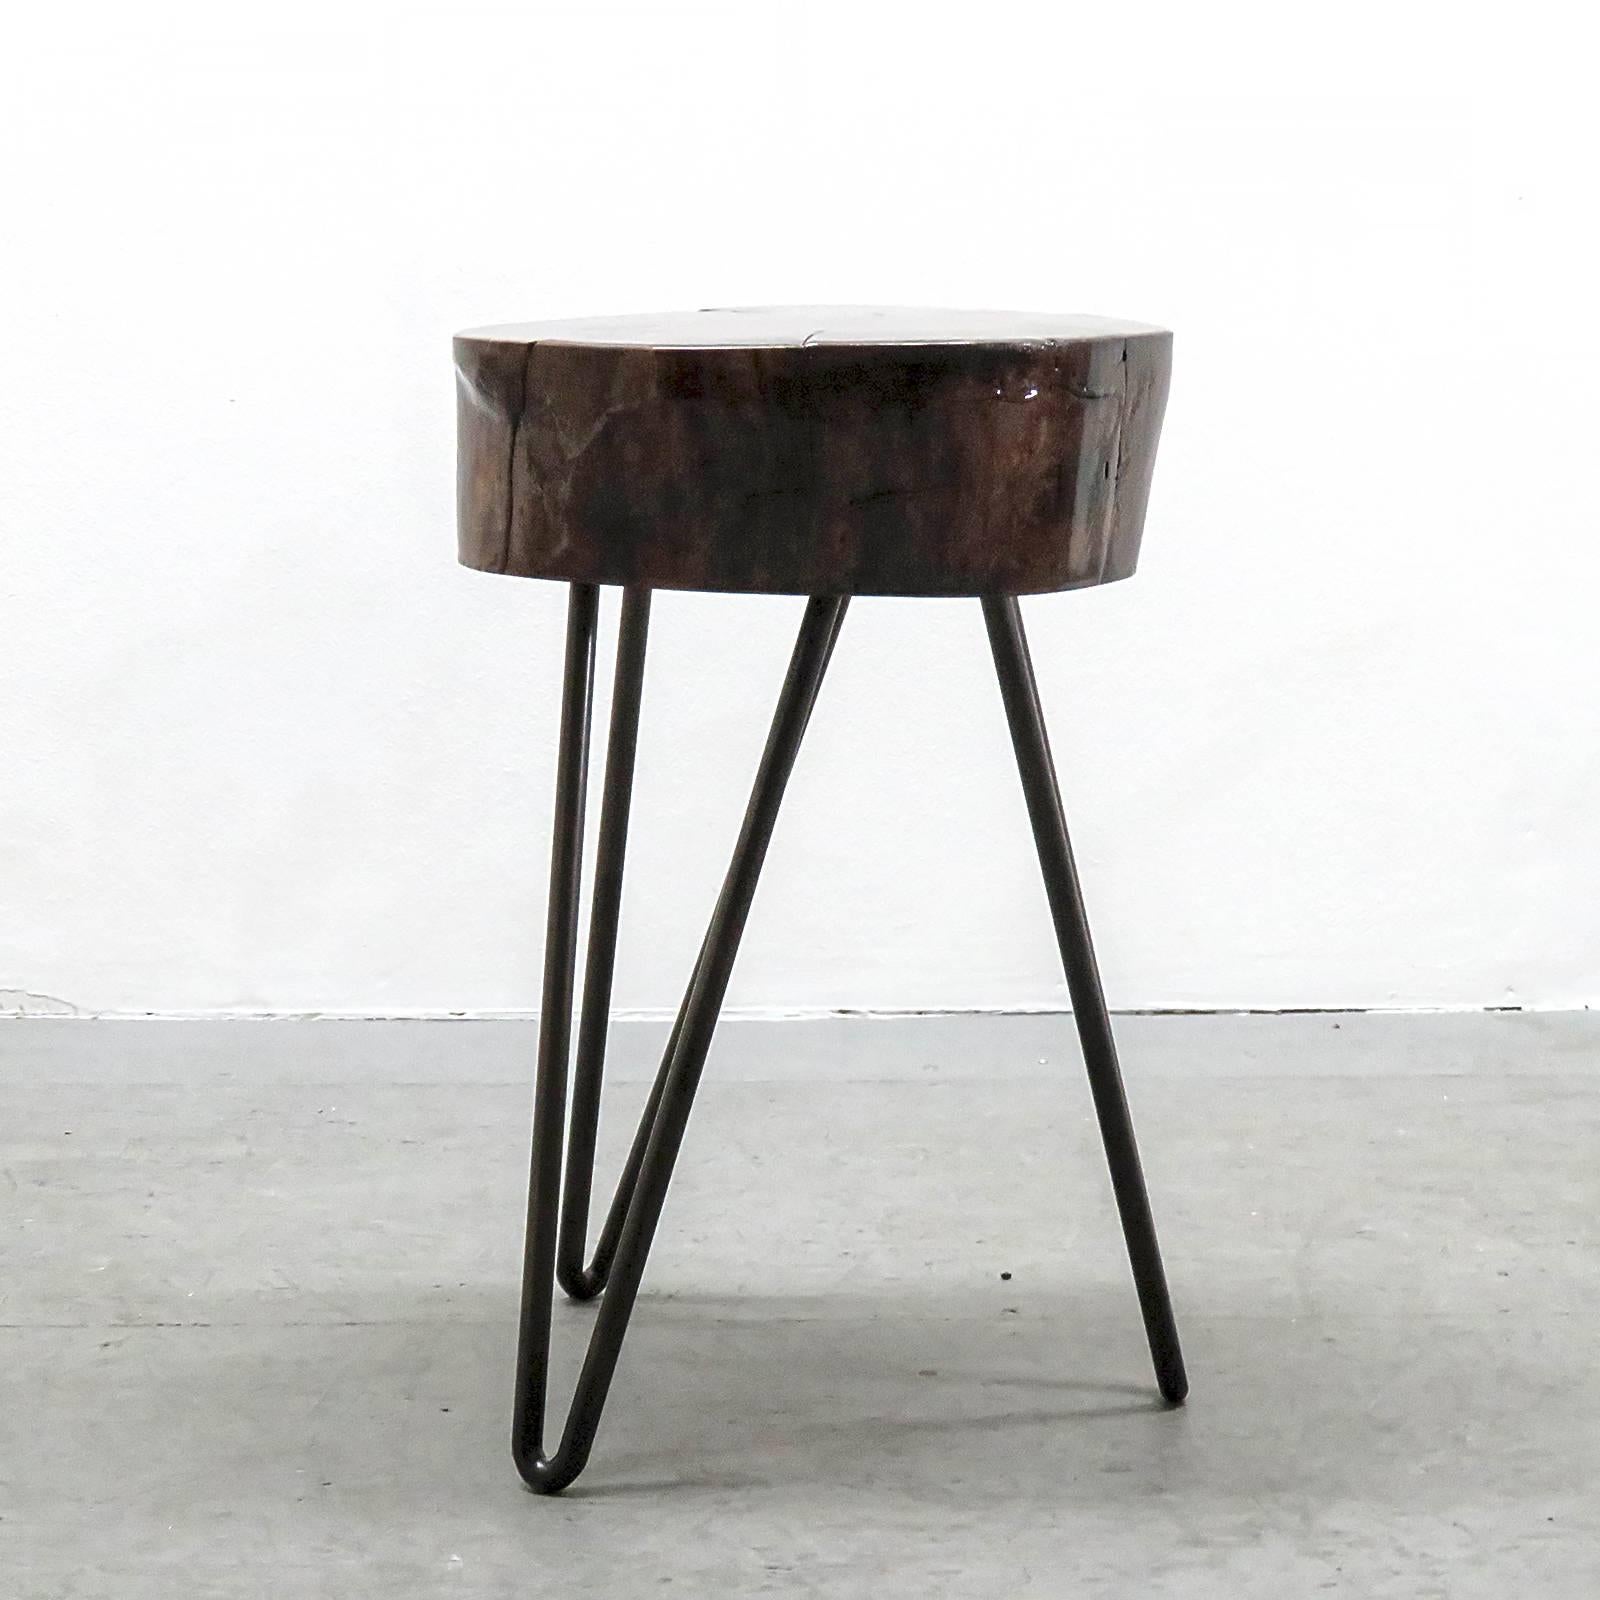 Wonderful live edge, lacquered wood tripod side tables on asymmetrical wrought iron hair pin legs by Artist Christoff van Kooning, limited edition, due to the nature of the handmade process, sizes and wood grain vary within reason.